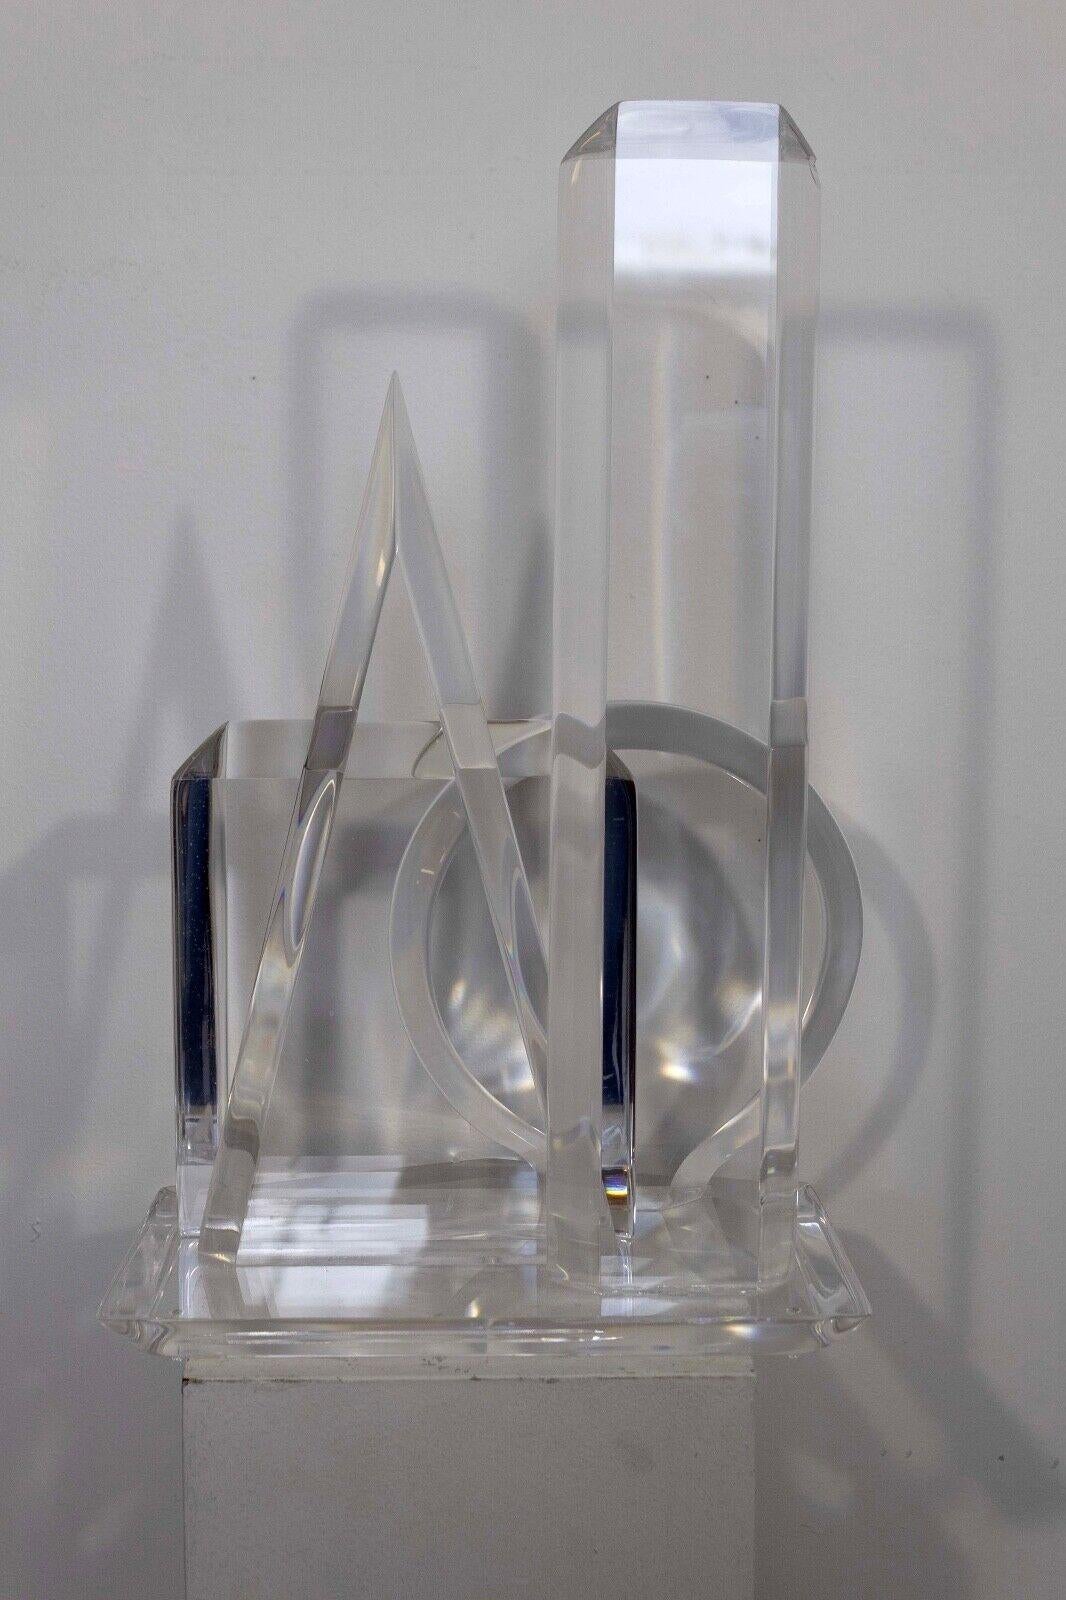 20th Century Geometric Multi Shapes Lucite Acrylic Sculpture Van Teal Signed on Lucite Base